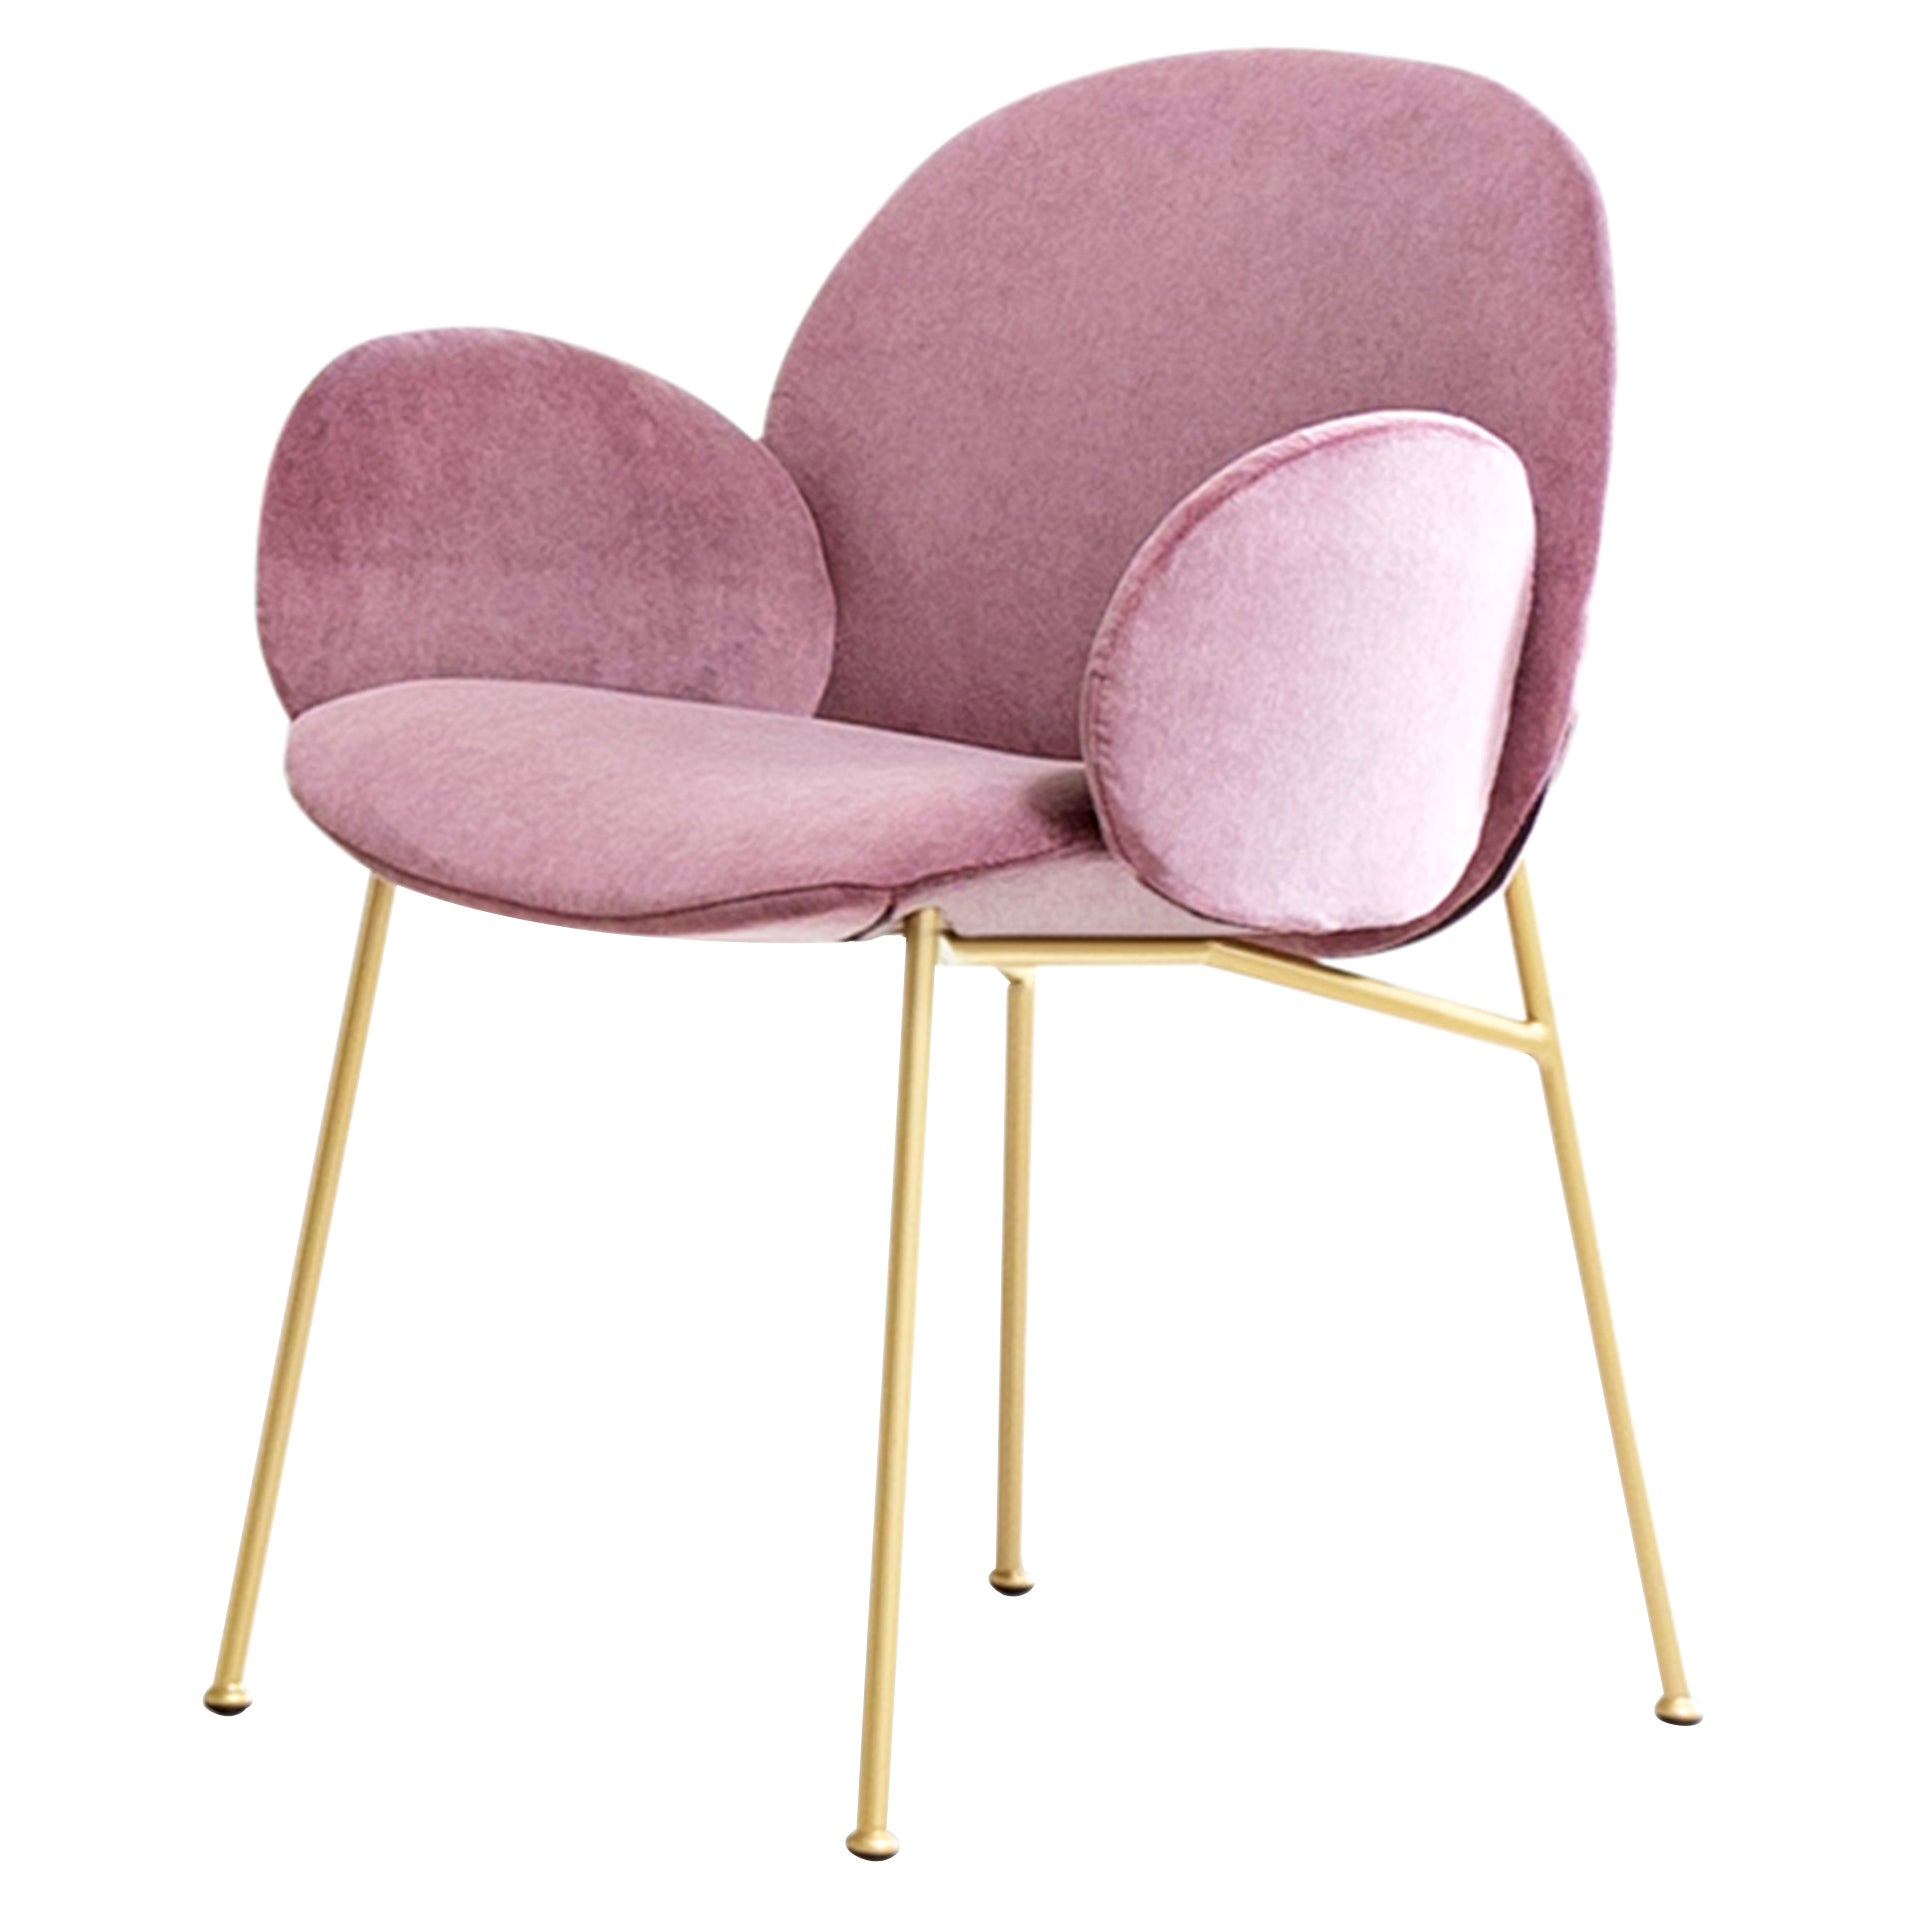 Ola Chair with Armrest in Violet 19 Pink Upholstery & Satin Brass Legs by Saba For Sale